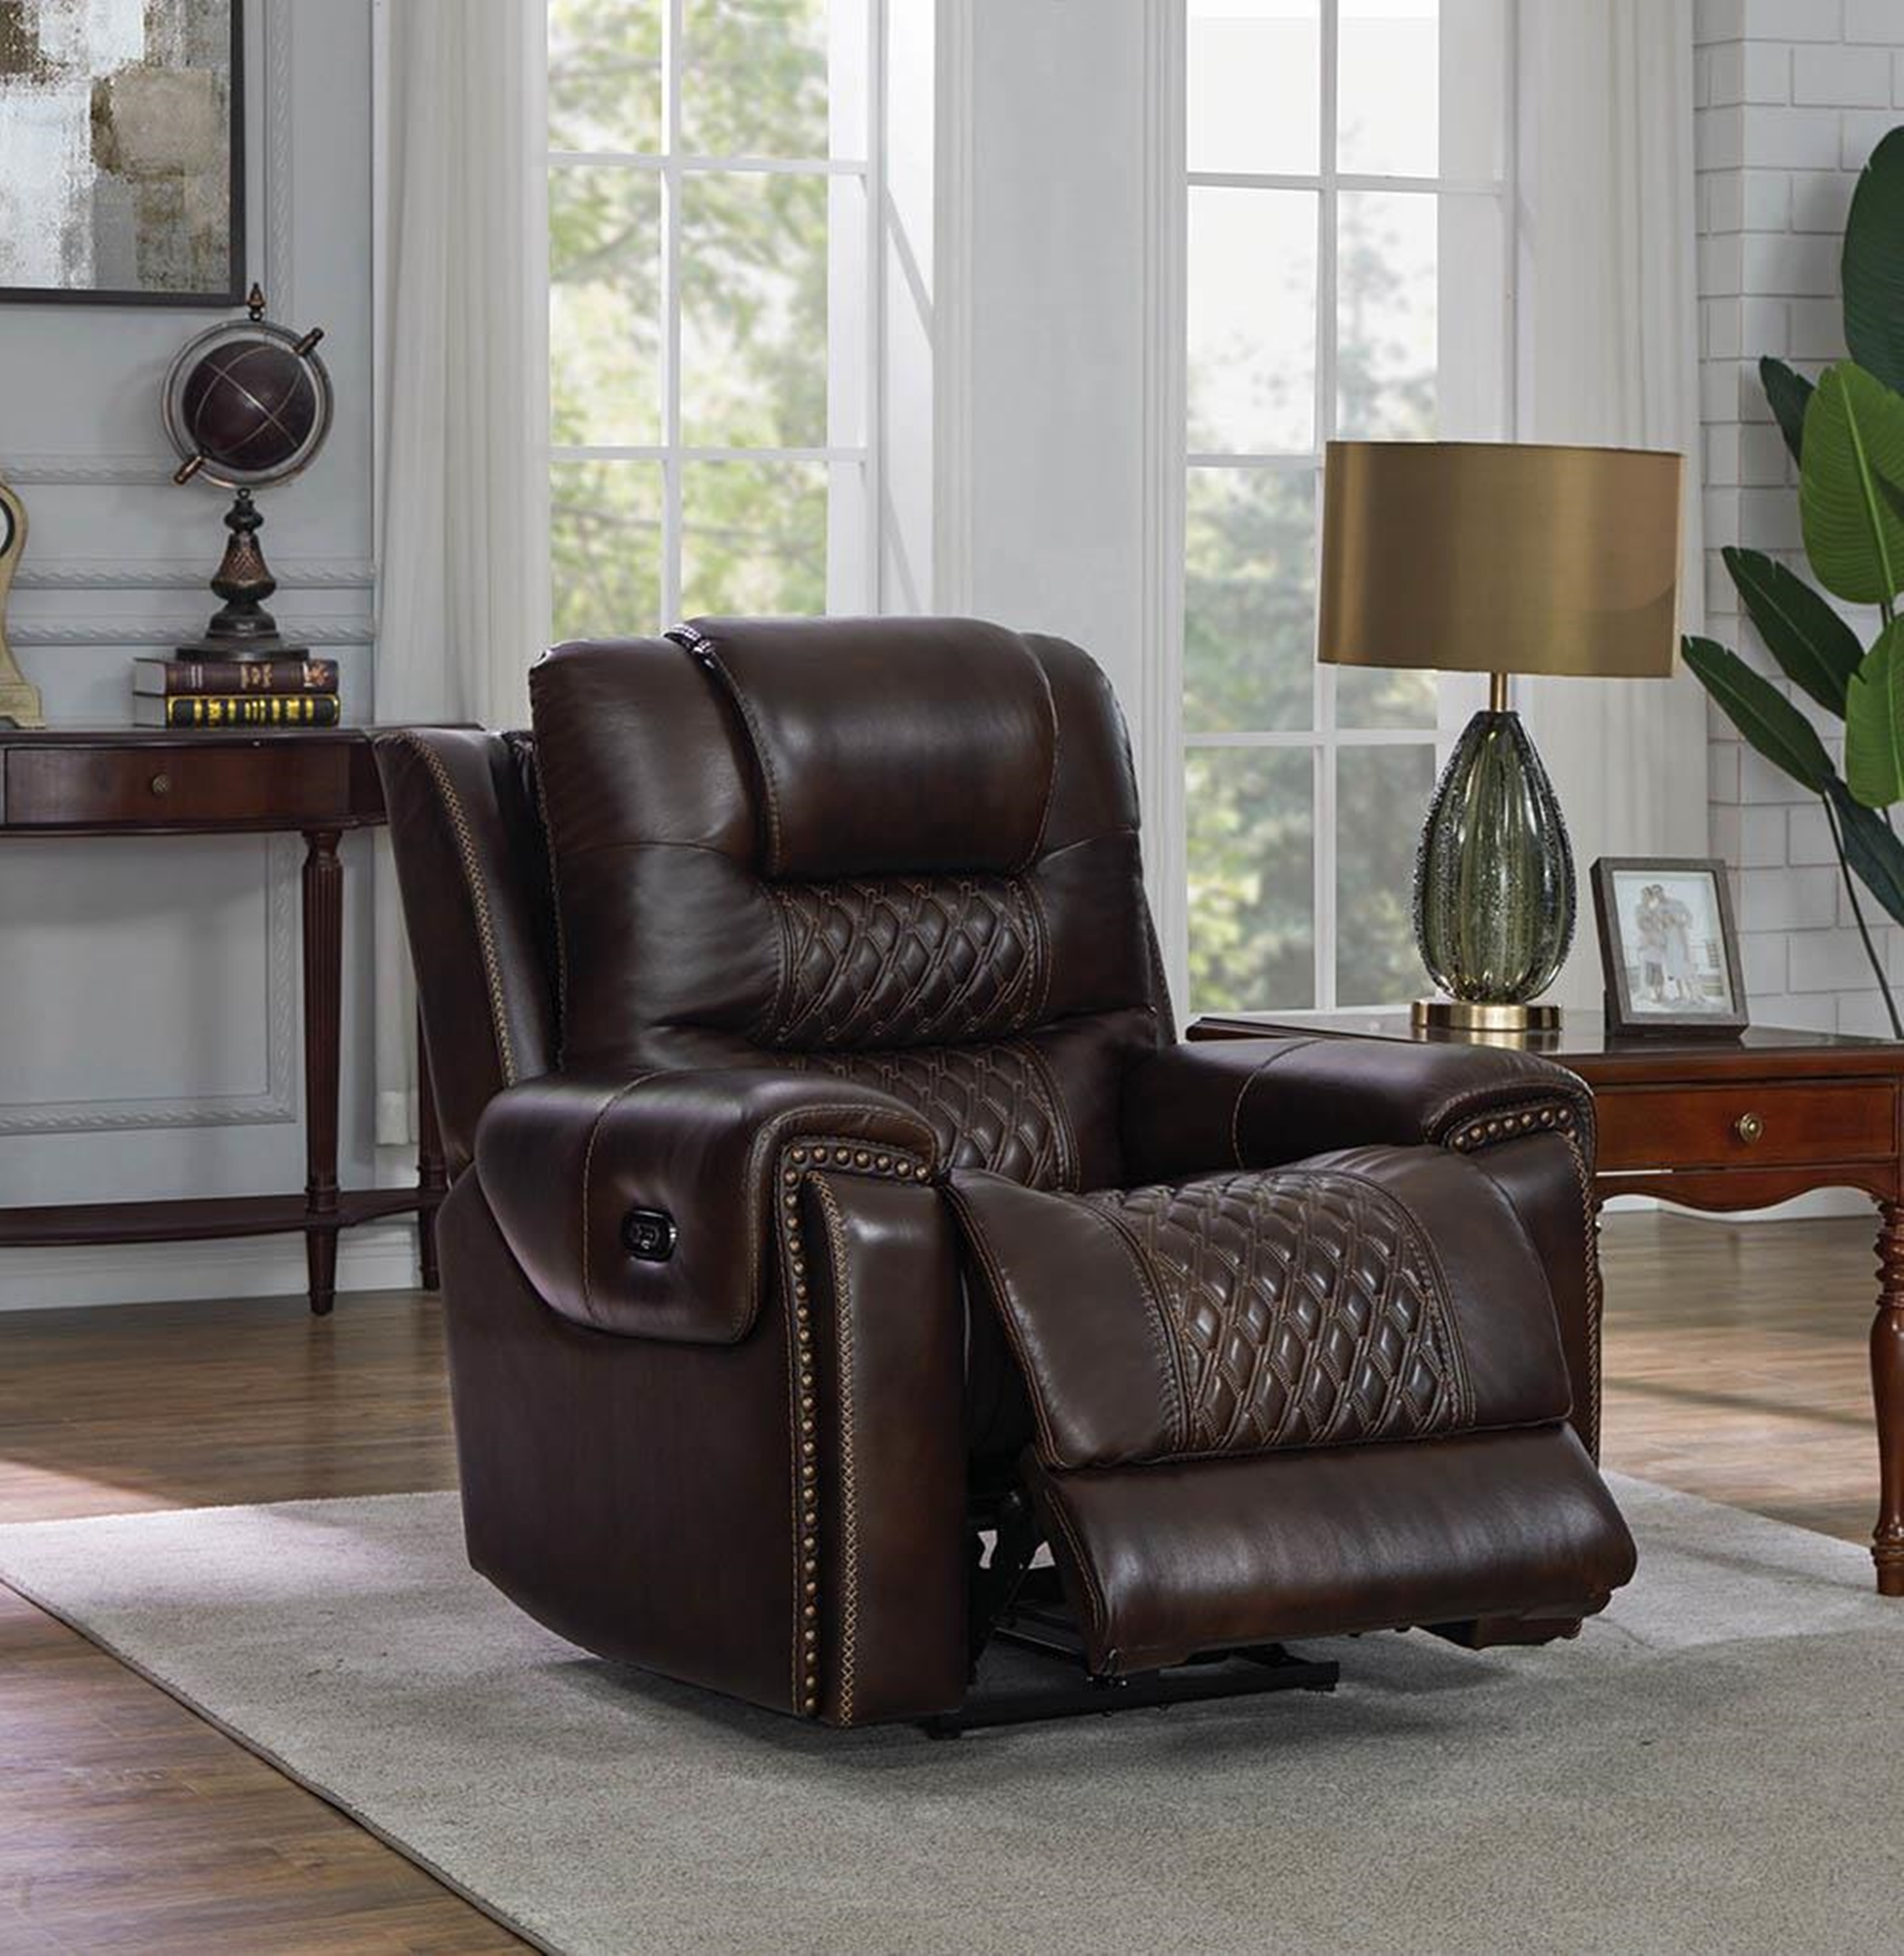 North Dark Brown Power2 Recliner - Click Image to Close